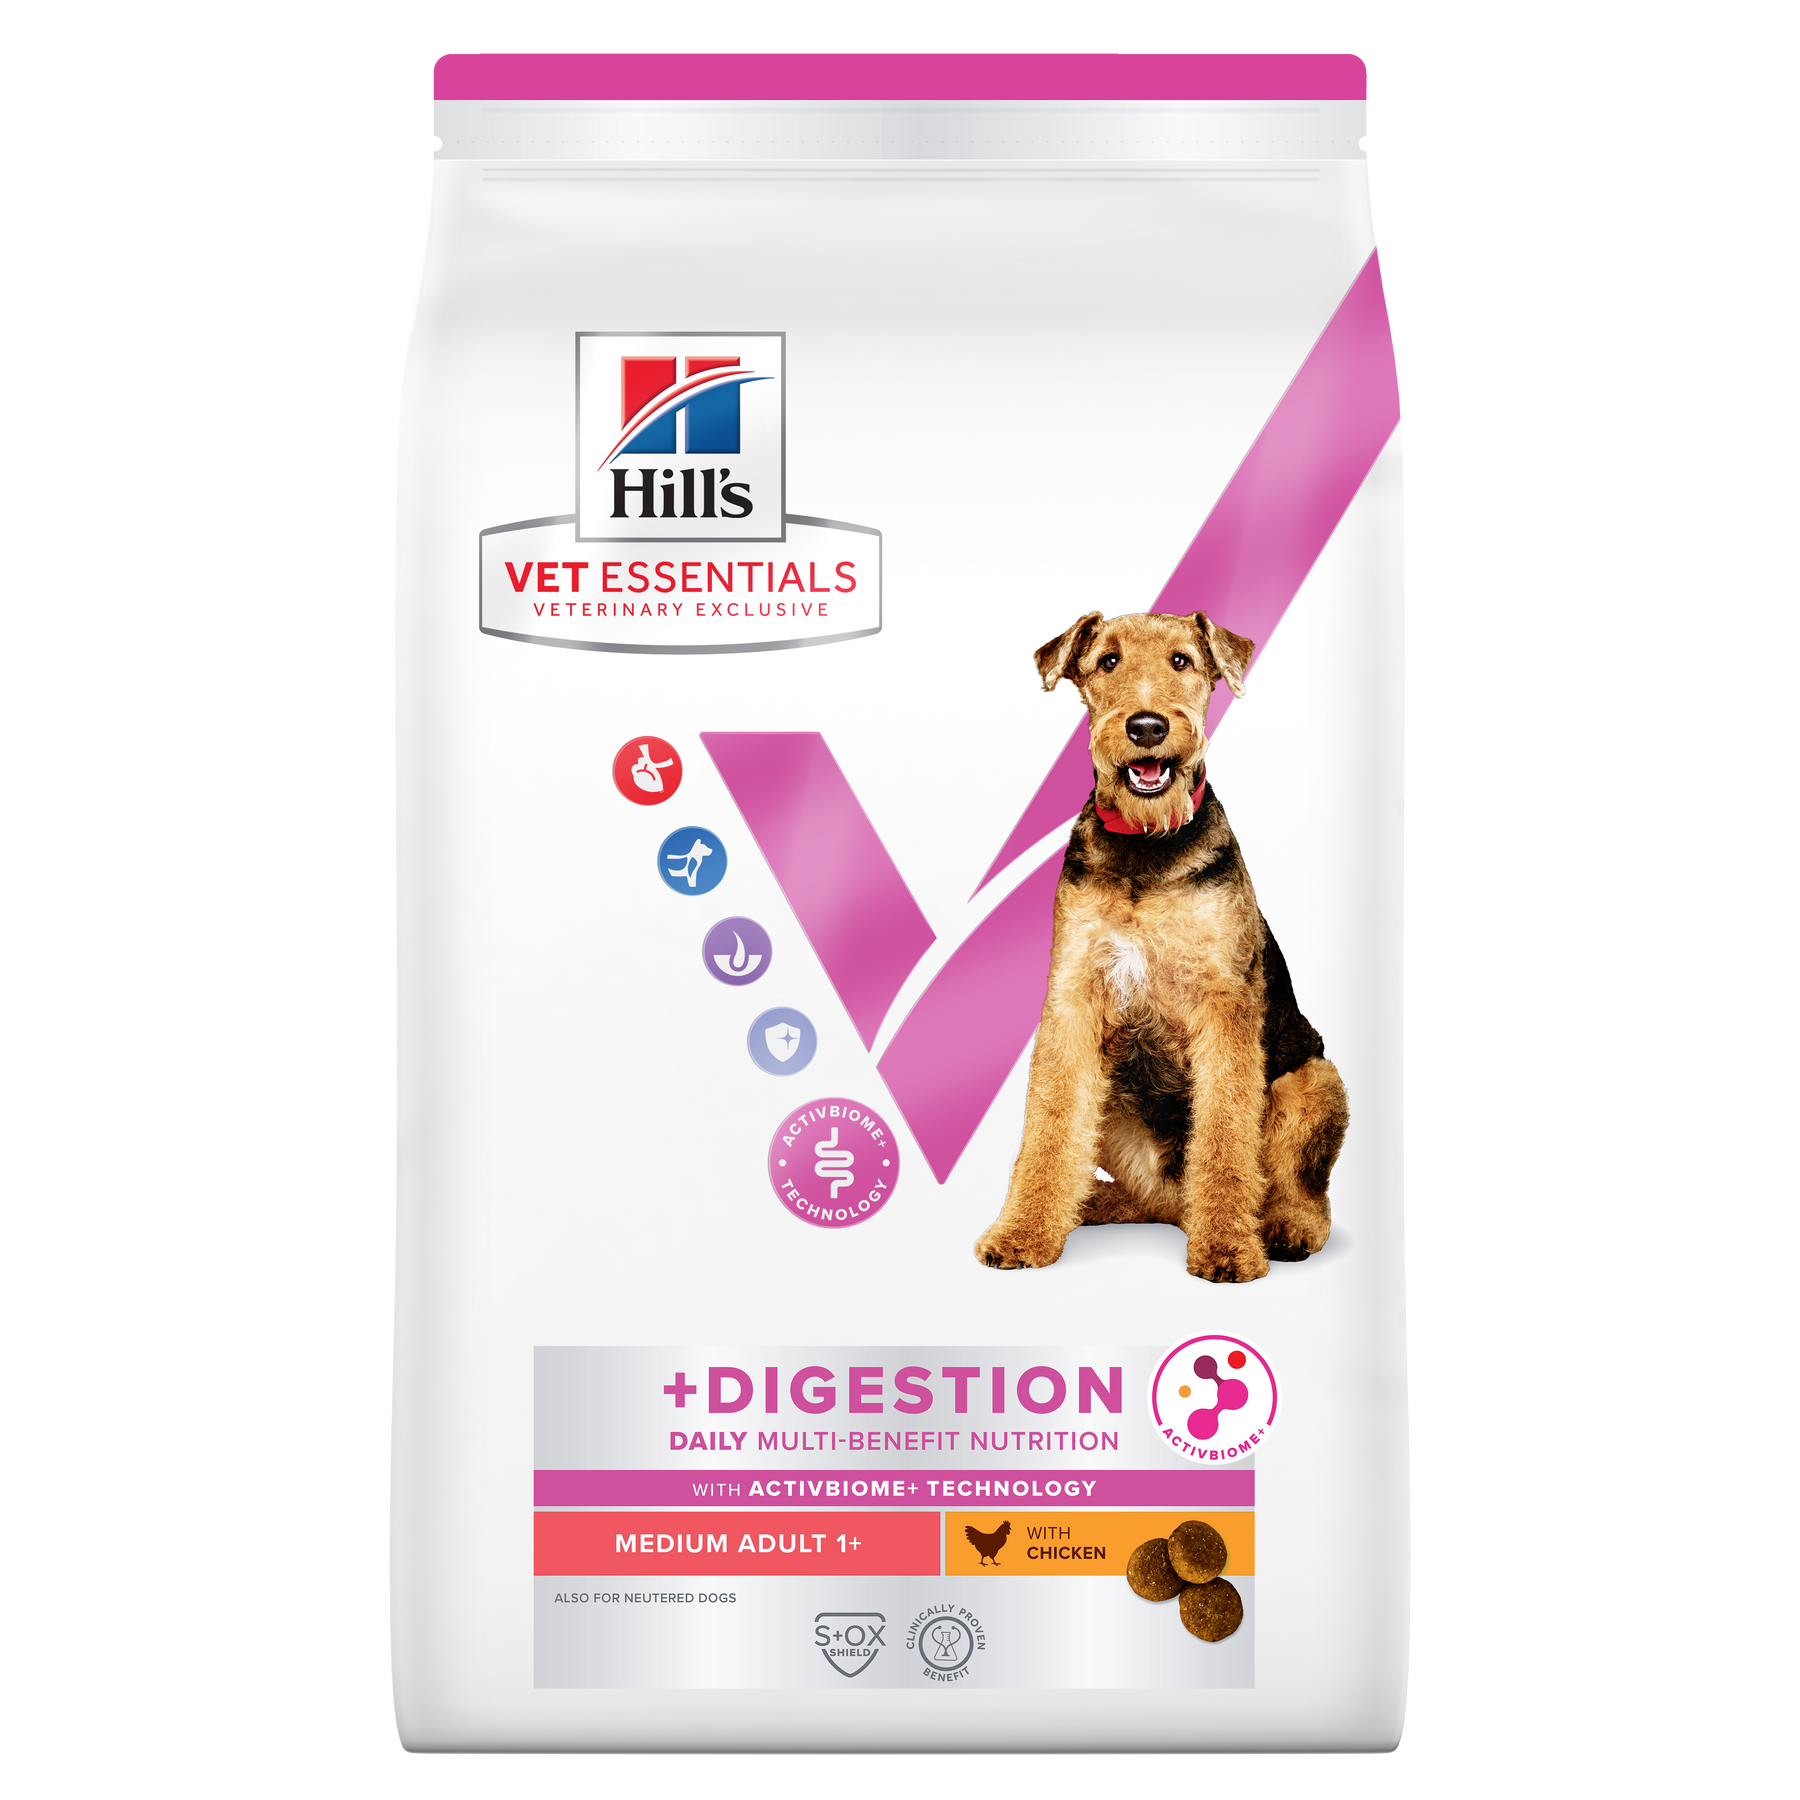 Hill's VET ESSENTIALS MULTI-BENEFIT + DIGESTION Adult 1+ Medium Dry Dog Food with Chicken